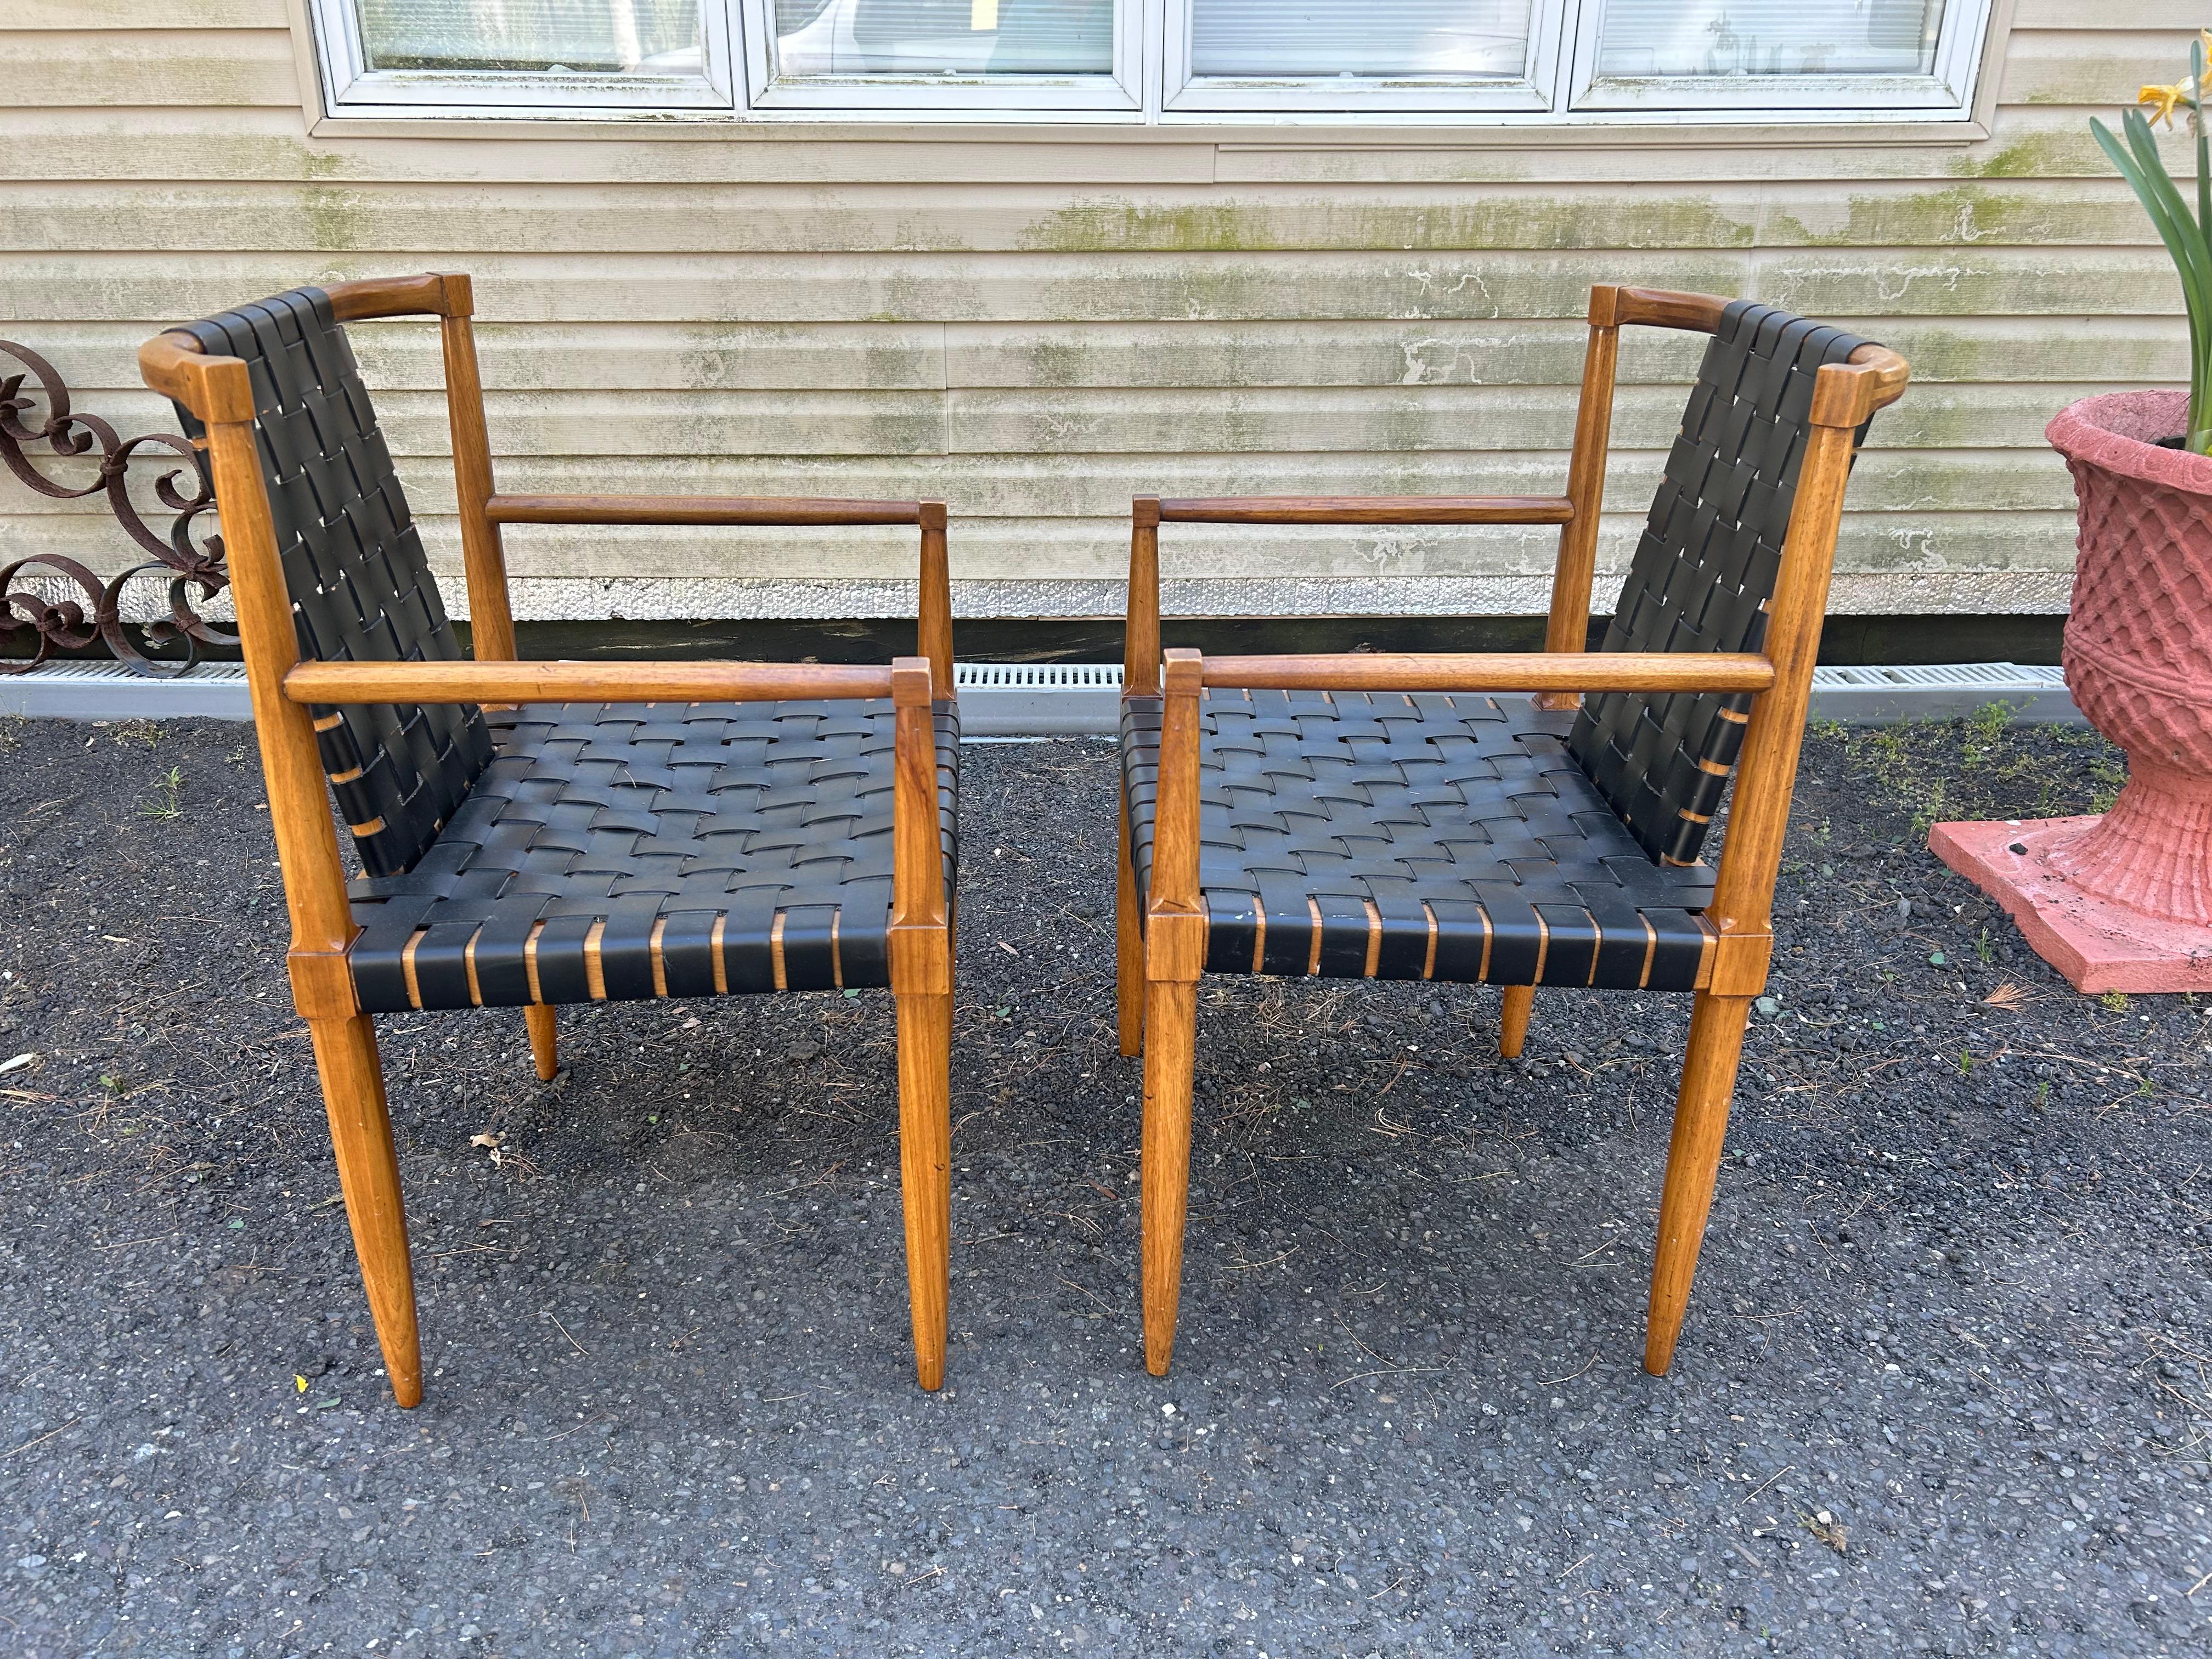 Hard to find set of 6 dining chairs from the Tomlinson “Sophisticate Line” model no 61 dated 1958. Includes 4 side chairs and two armchairs. Pecan hardwood frame with woven black leather straps at seats and backs. This was a limited production